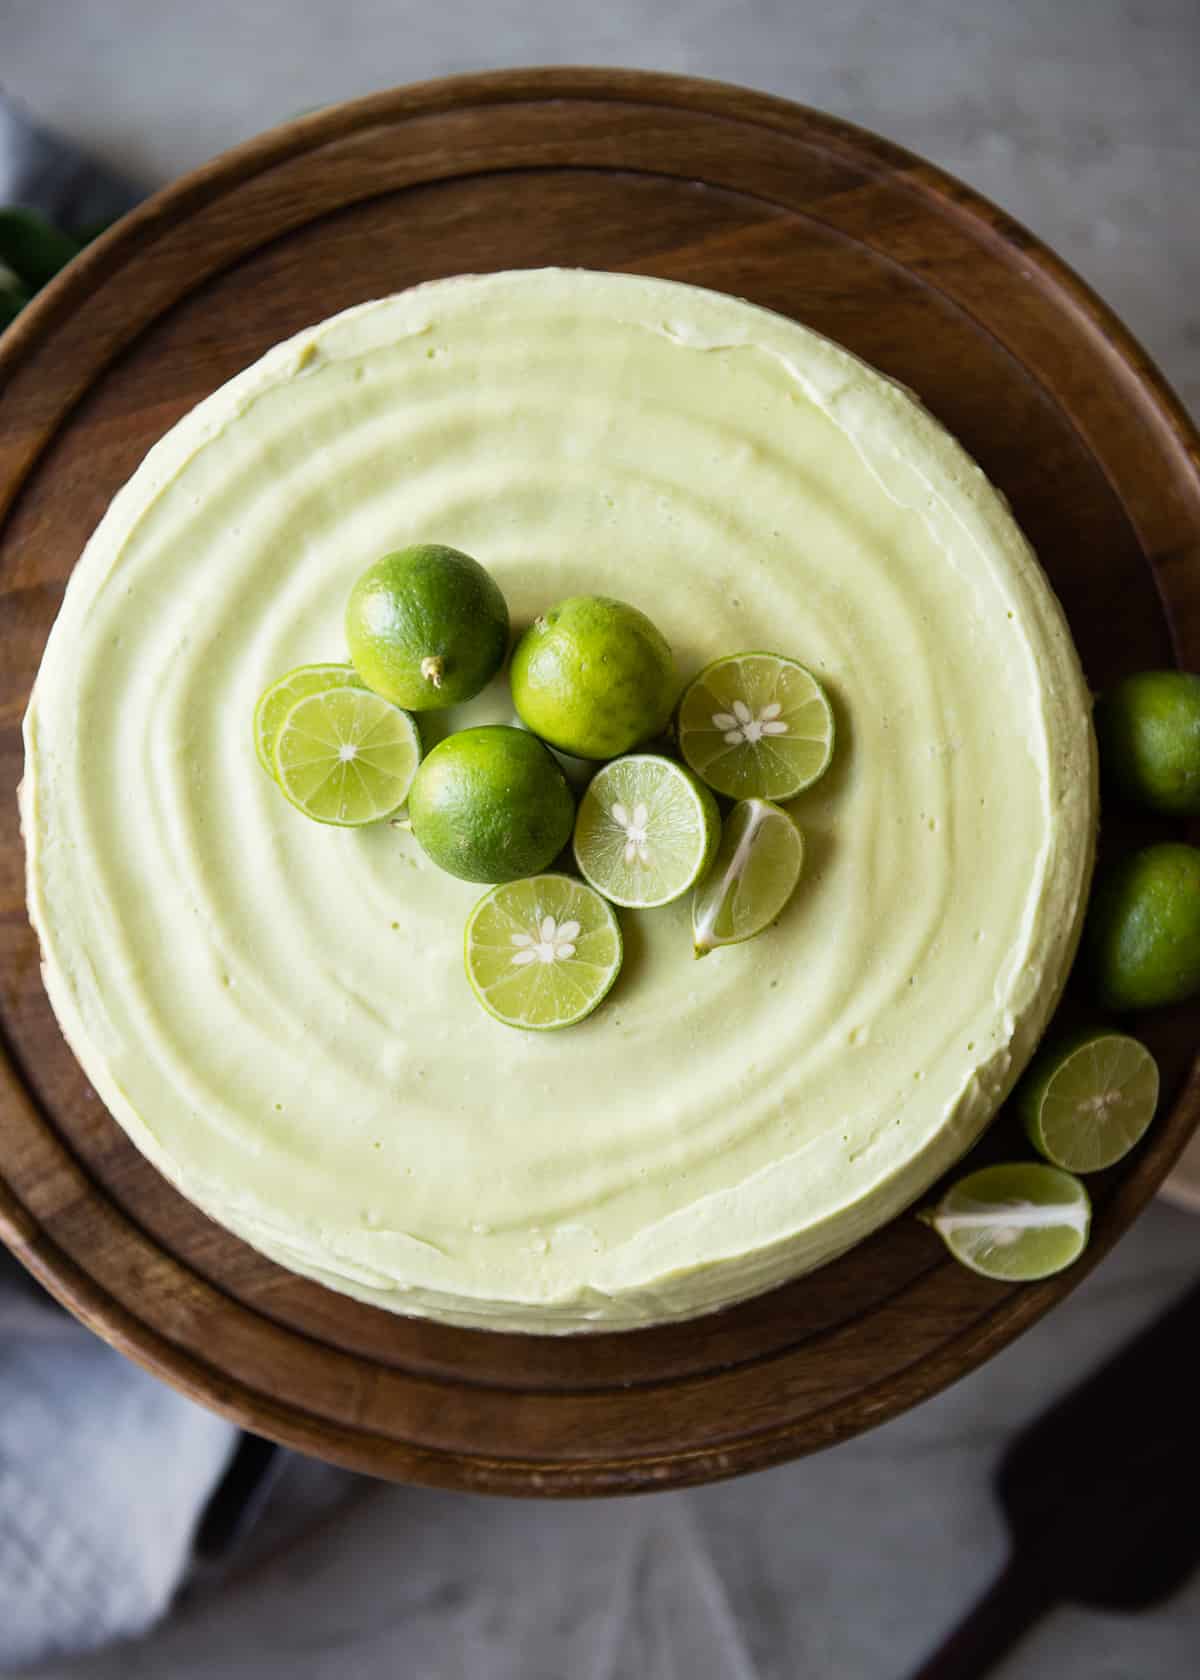 This Raw Key Lime Pie Is the Perfect Summer Dessert